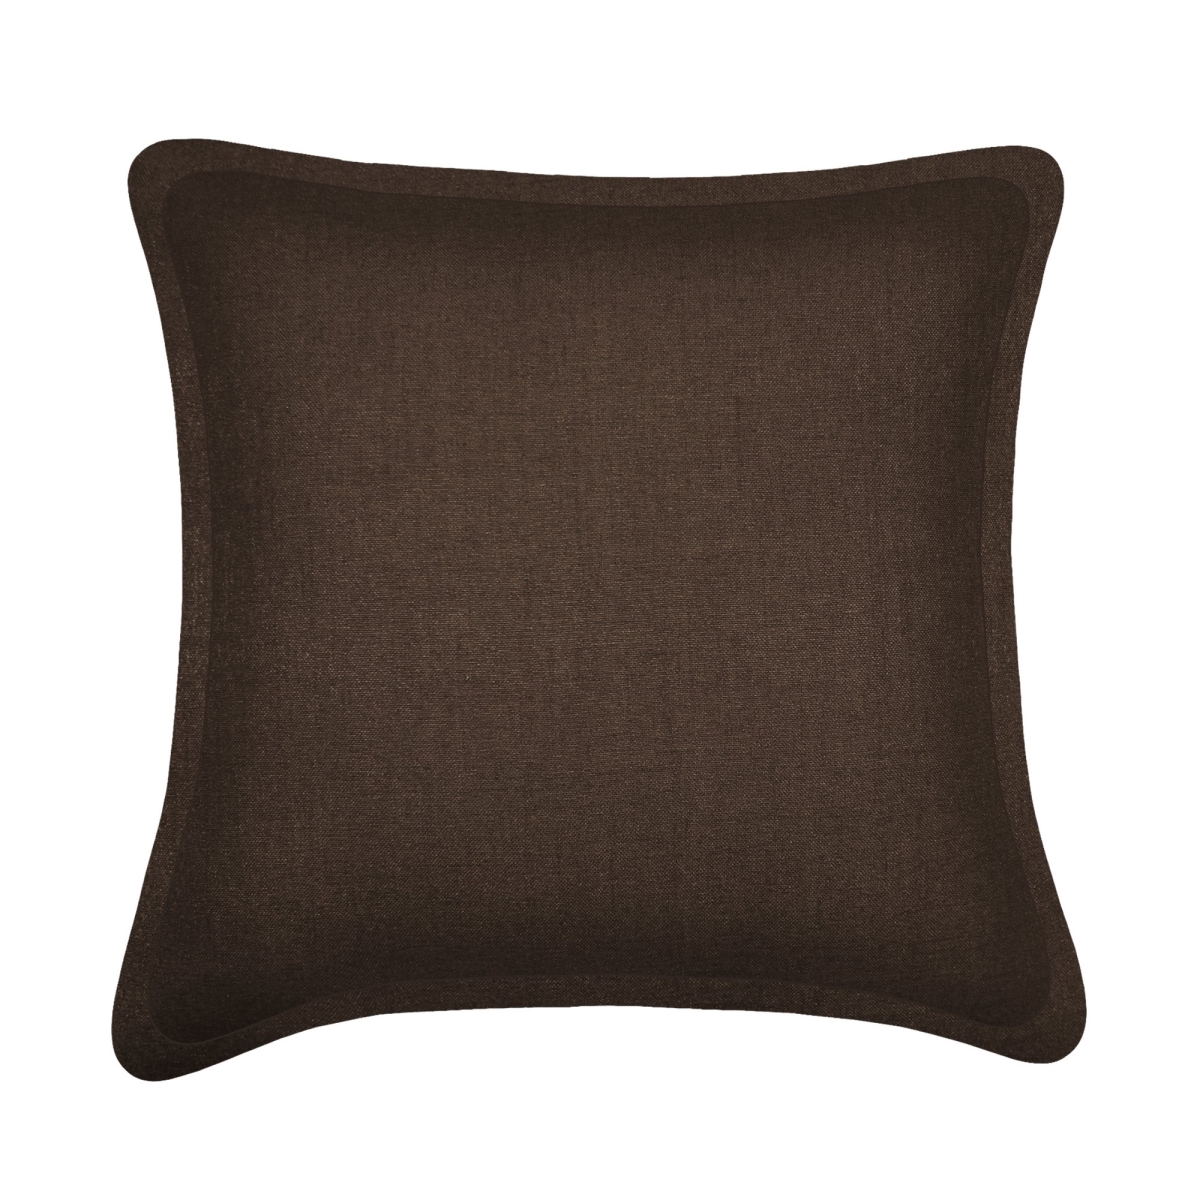 20 X 20 In. Tweed Cushion Cover - Brown